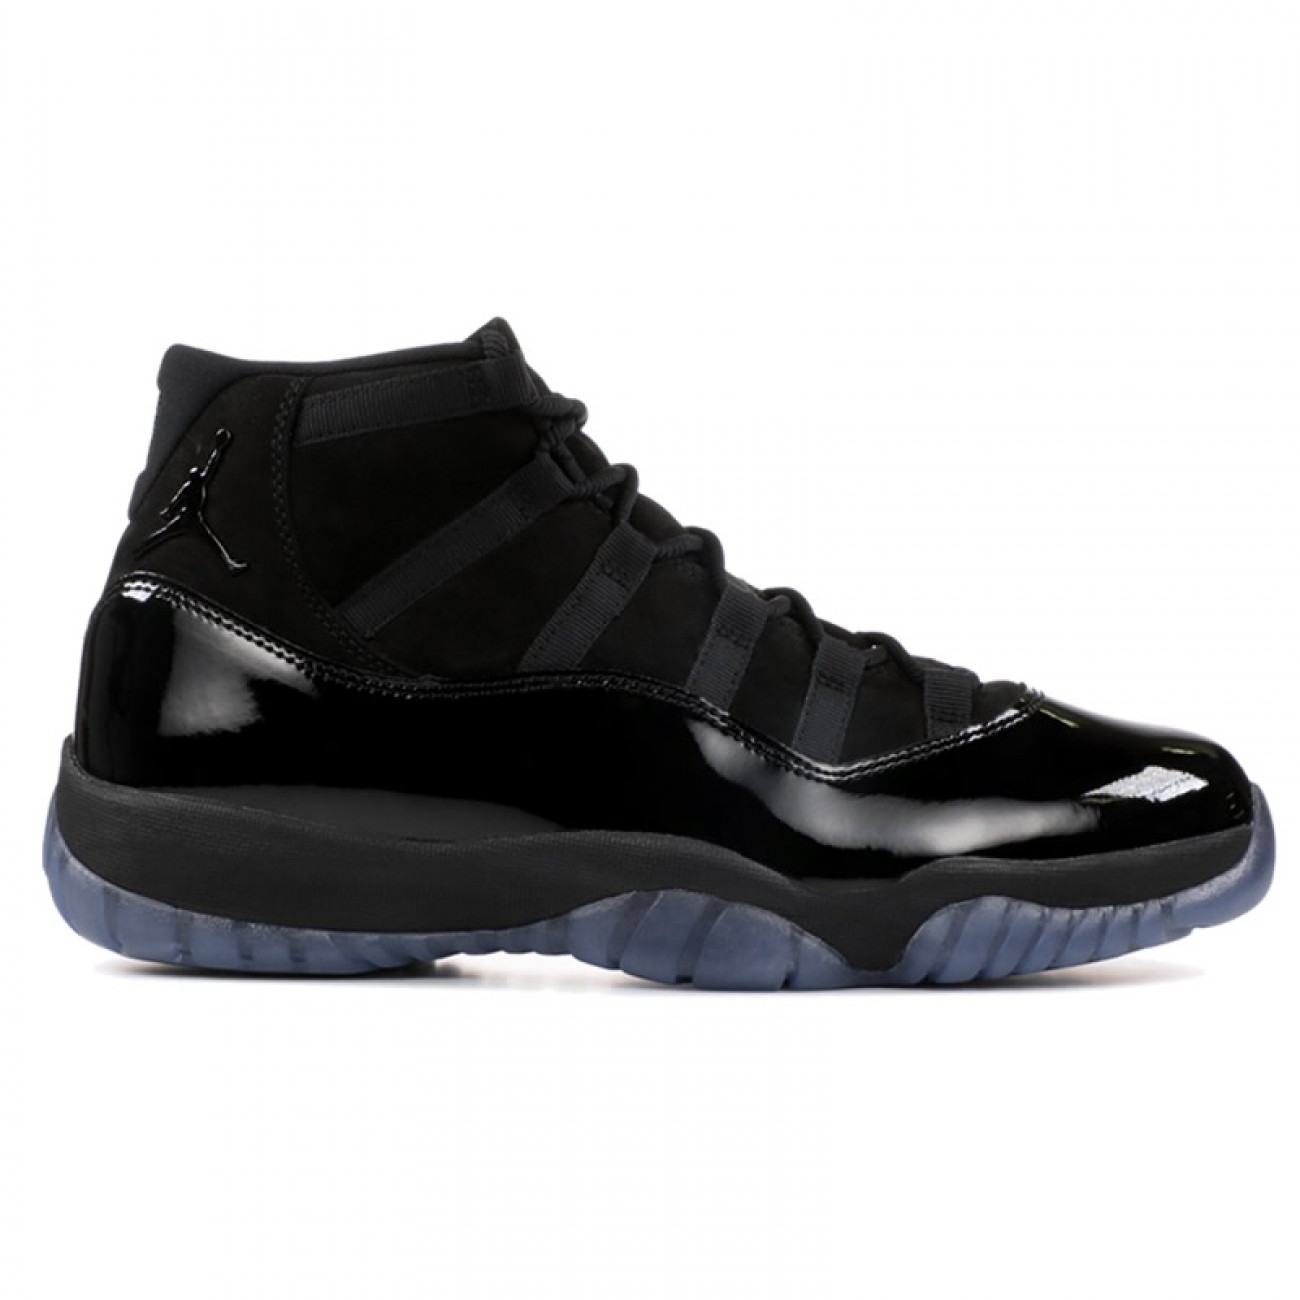 Air Jordan 11 "Cap and Gown" Prom Night Blackout 378037-005